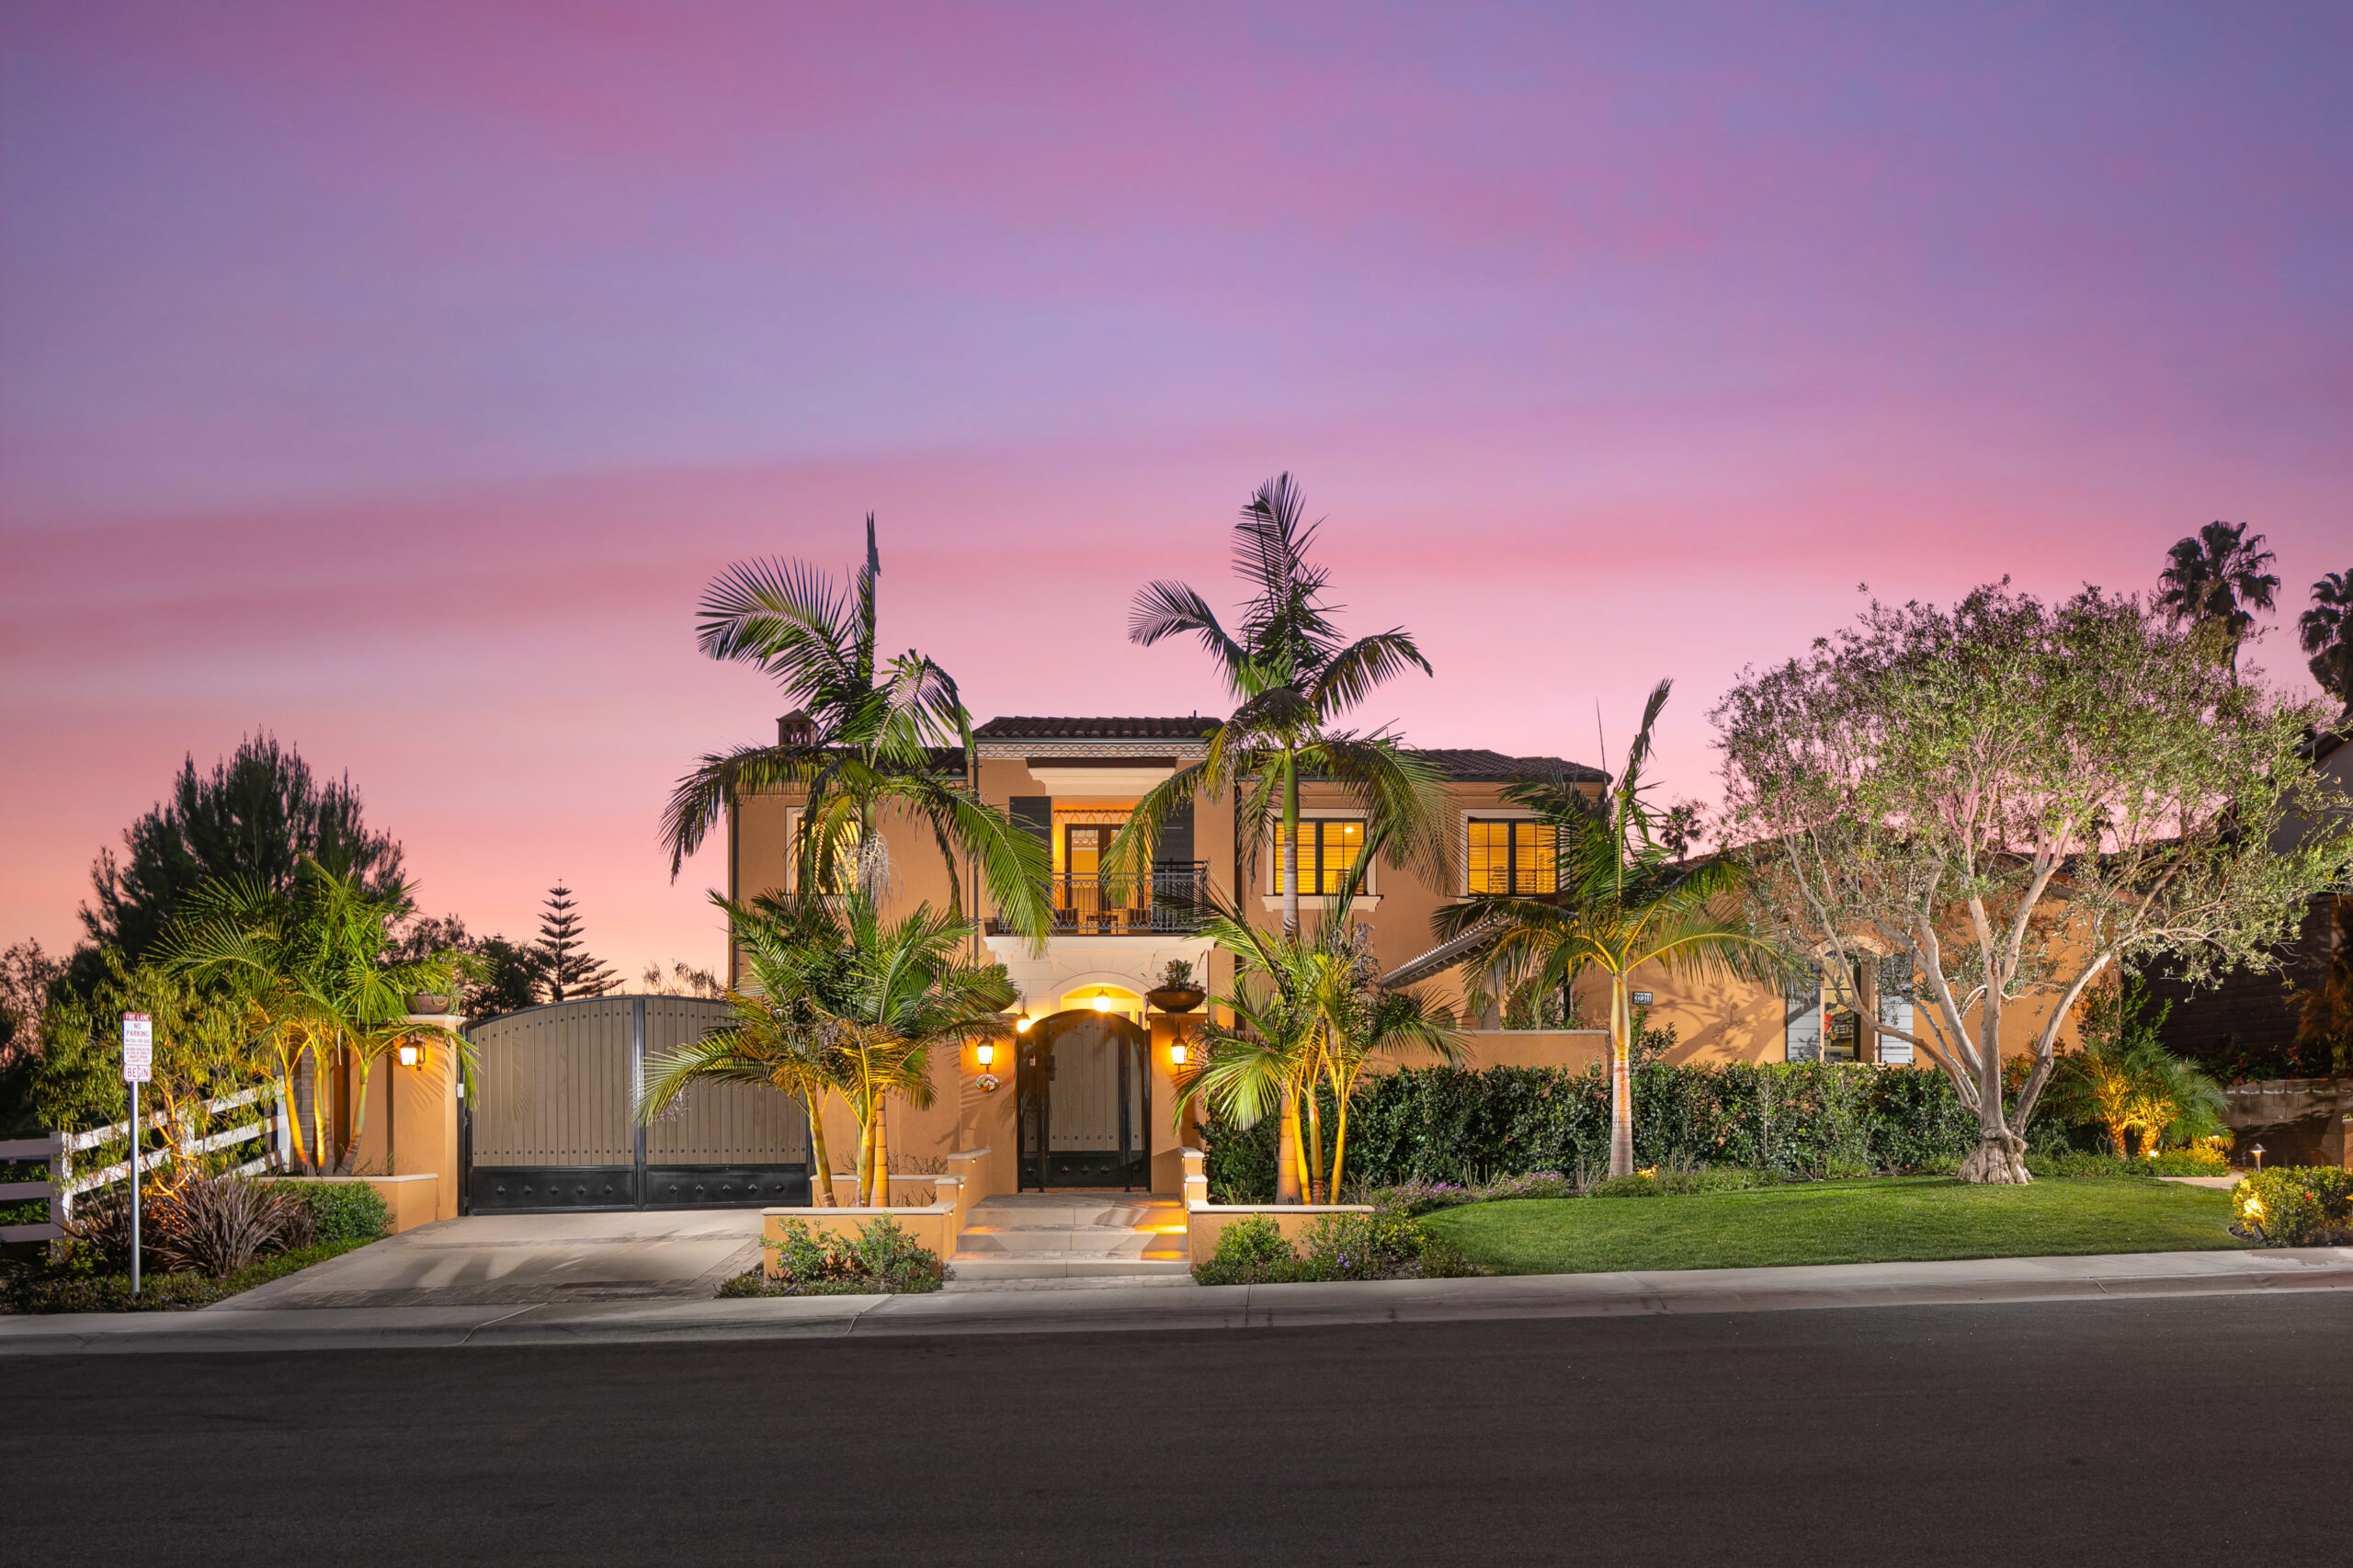 A Breathtaking Home Bathed in Beautiful Sunset Glow: A Perfect Harmony of Fiery Sky and Serene Lighting